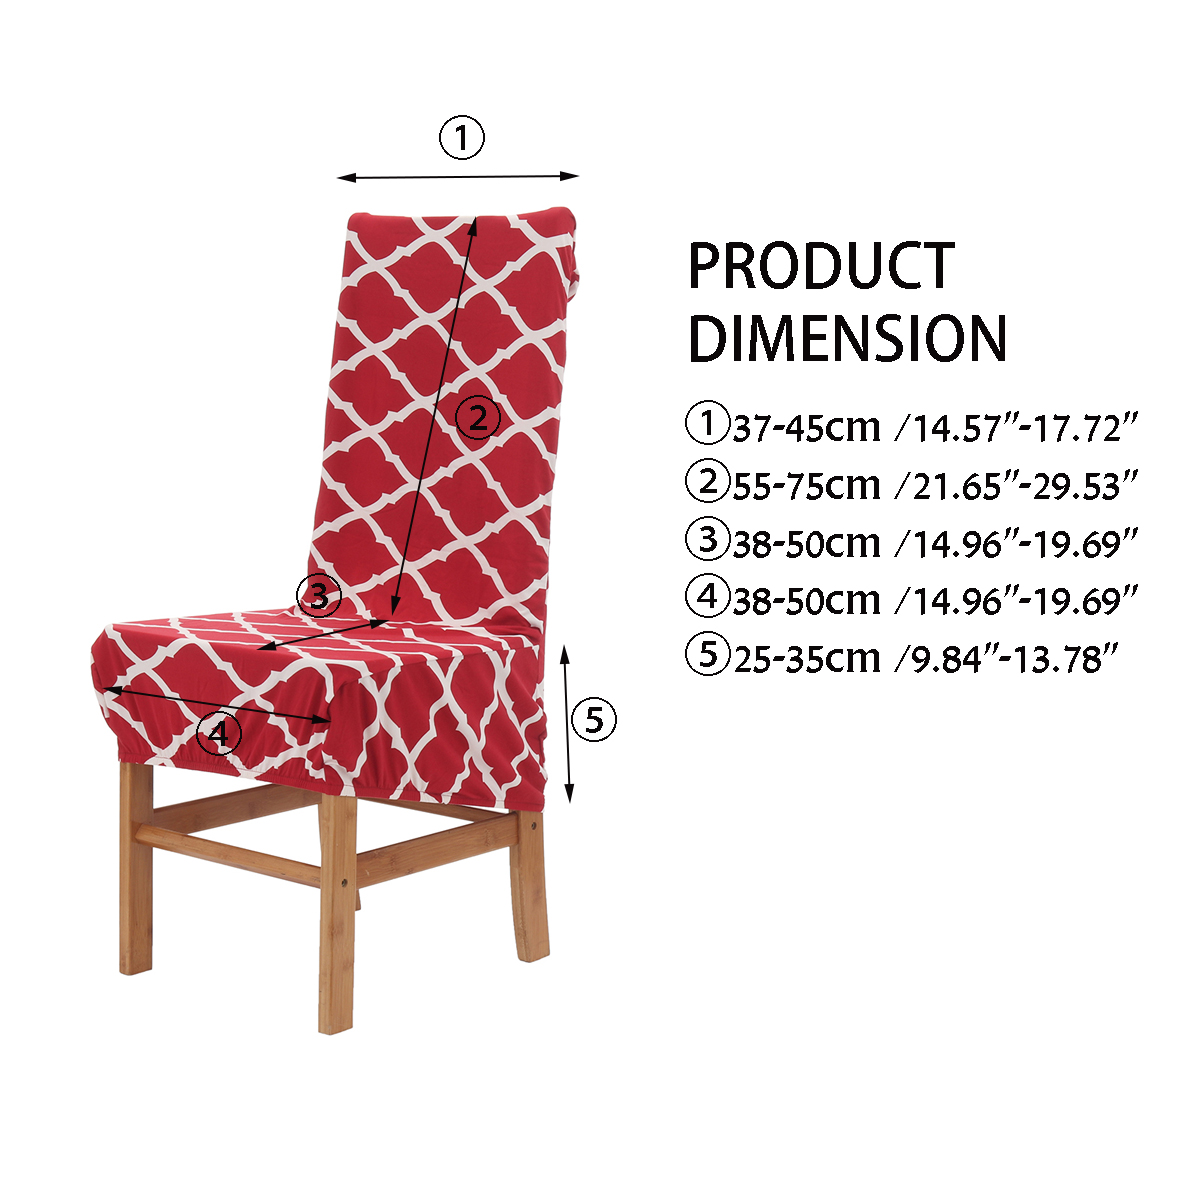 Printed-Stretch-Chair-Cover-Elastic-Seat-Chair-Covers-Office-Chair-for-Slipcovers-Restaurant-Banquet-1765523-8